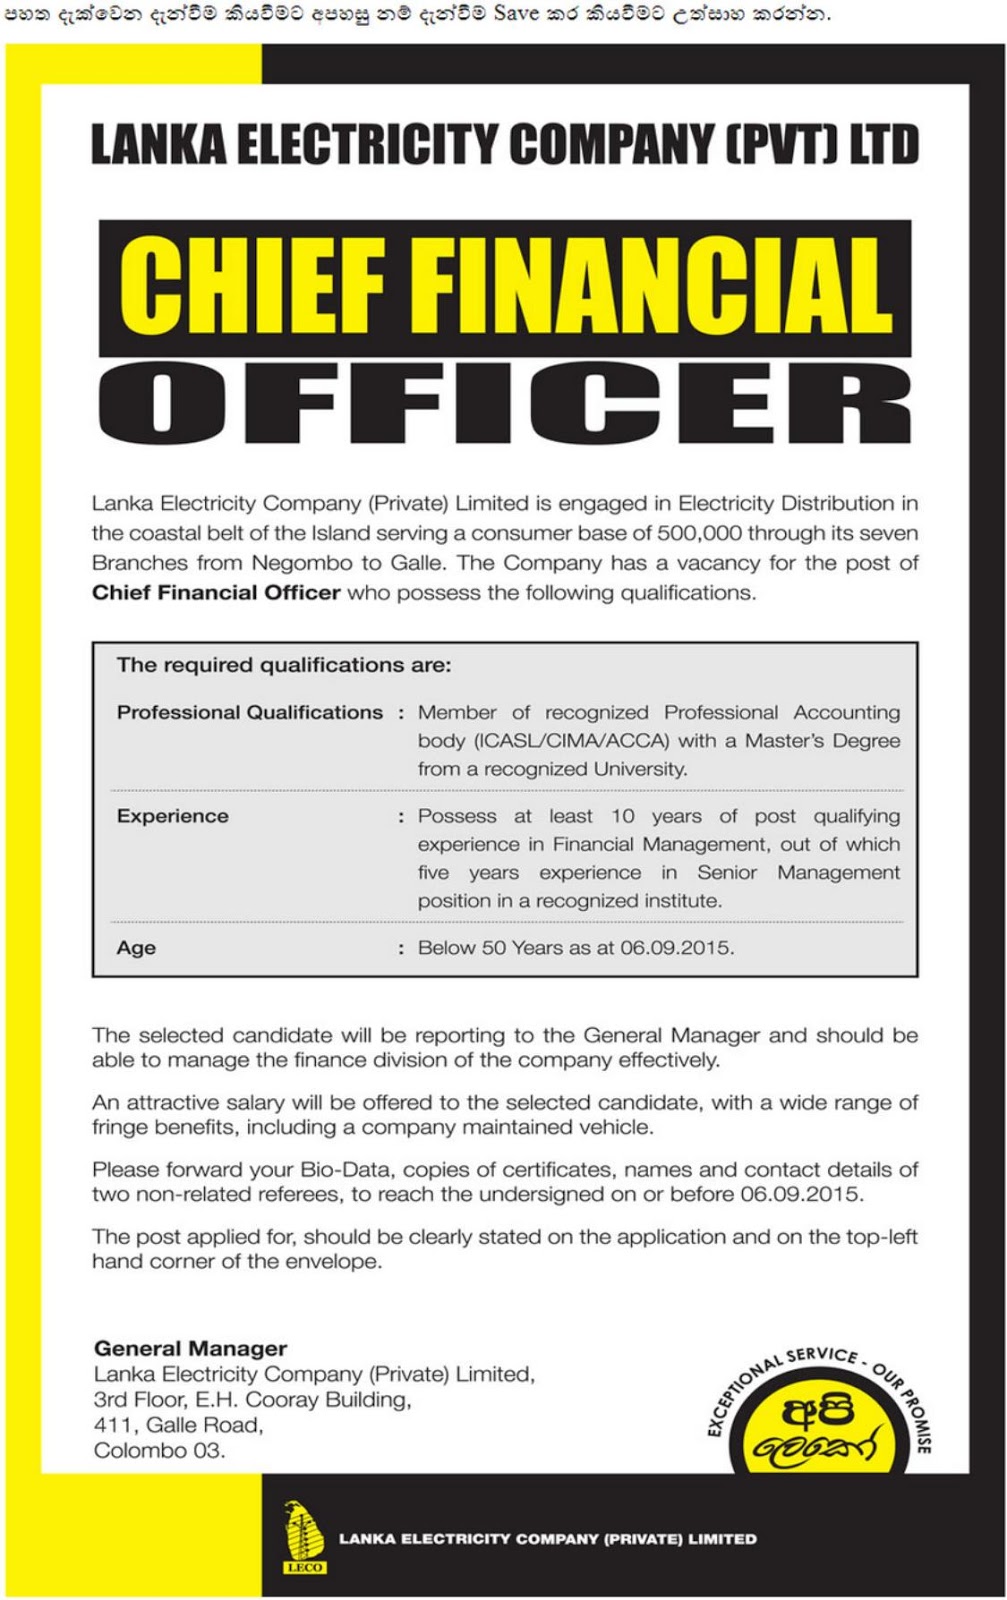 Chief Financial Officer Vacancy in Lanka Electricity Company